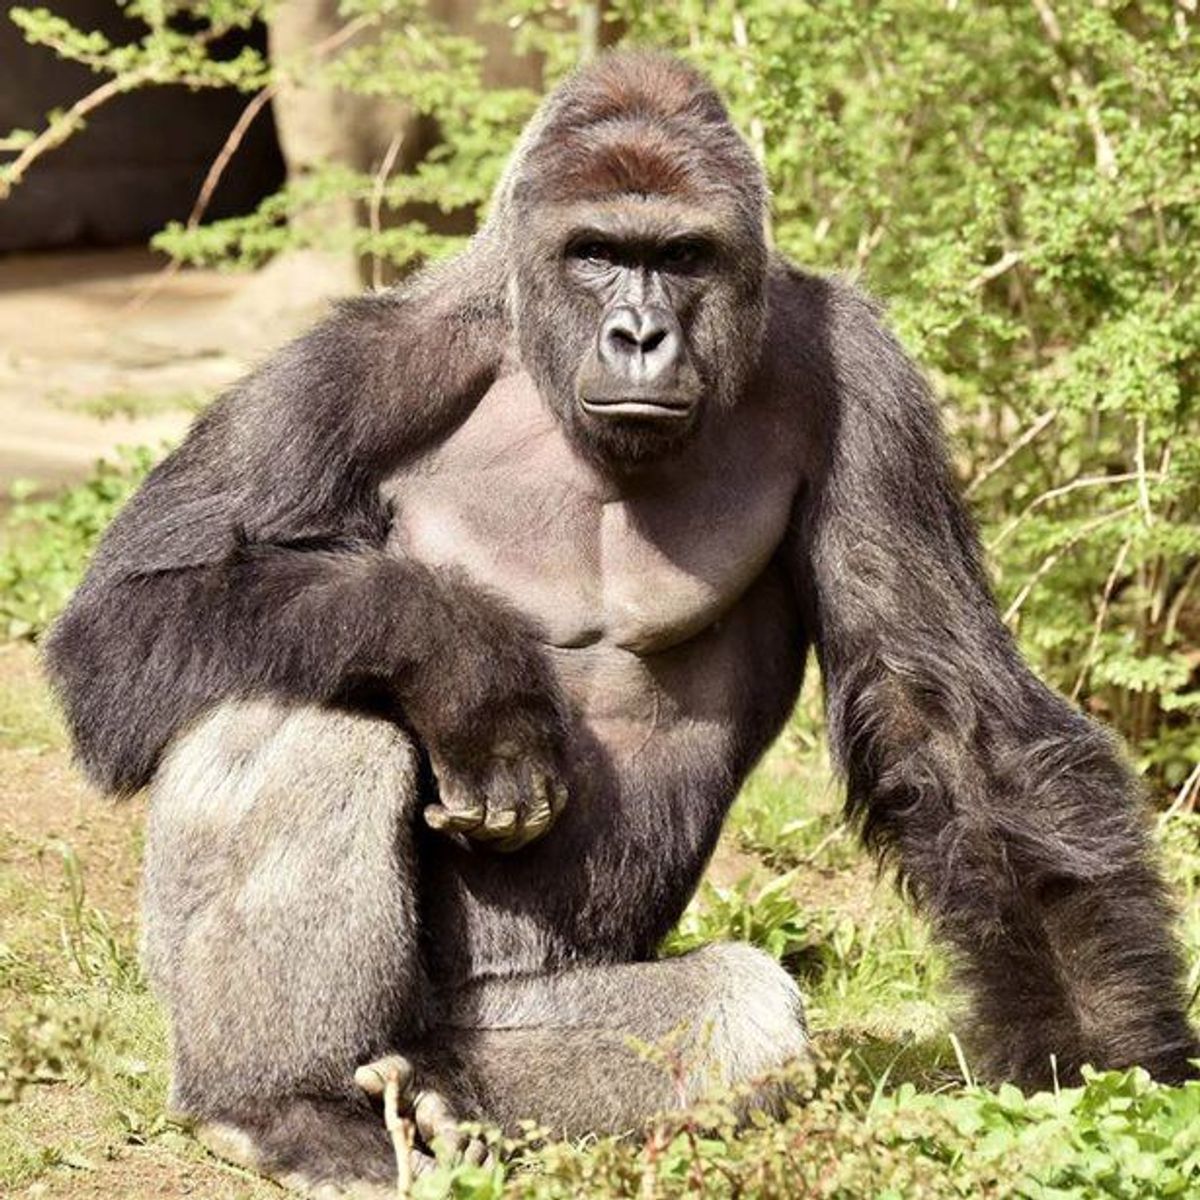 Harambe: Who Is To Blame?